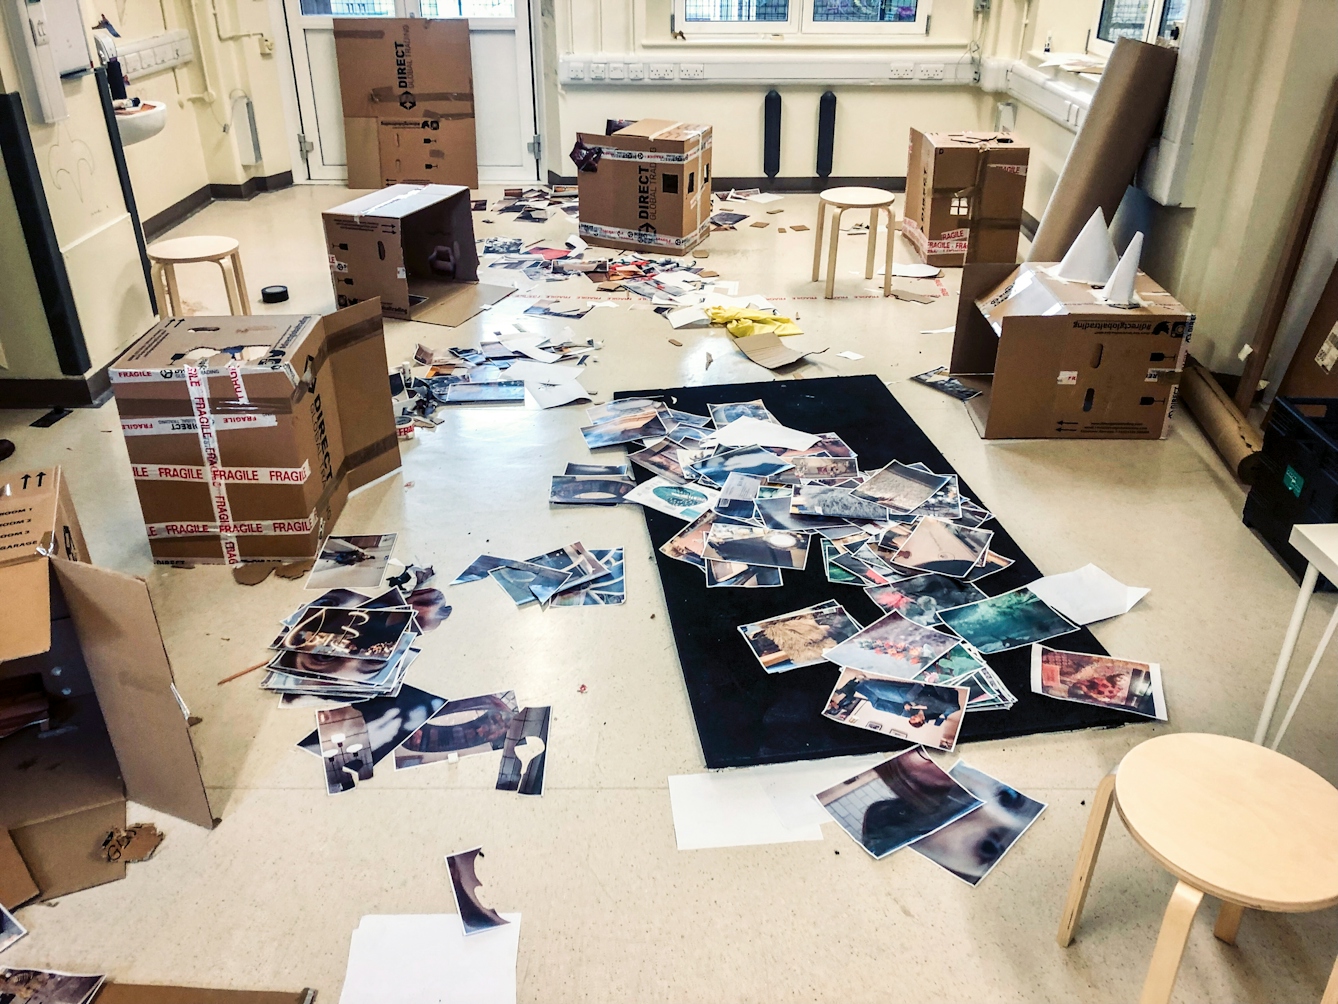 A photograph showing a room with magnolia painted walls, white PVC double doors and windows, and a lino floor on which a multitude of colour photocopies have been cut up and are strewn messily, many of which are on a black rectangular mat in the middle of the room.  Around the edge of the room there are six large open cardboard boxes on their sides, some with fragile stickers. 